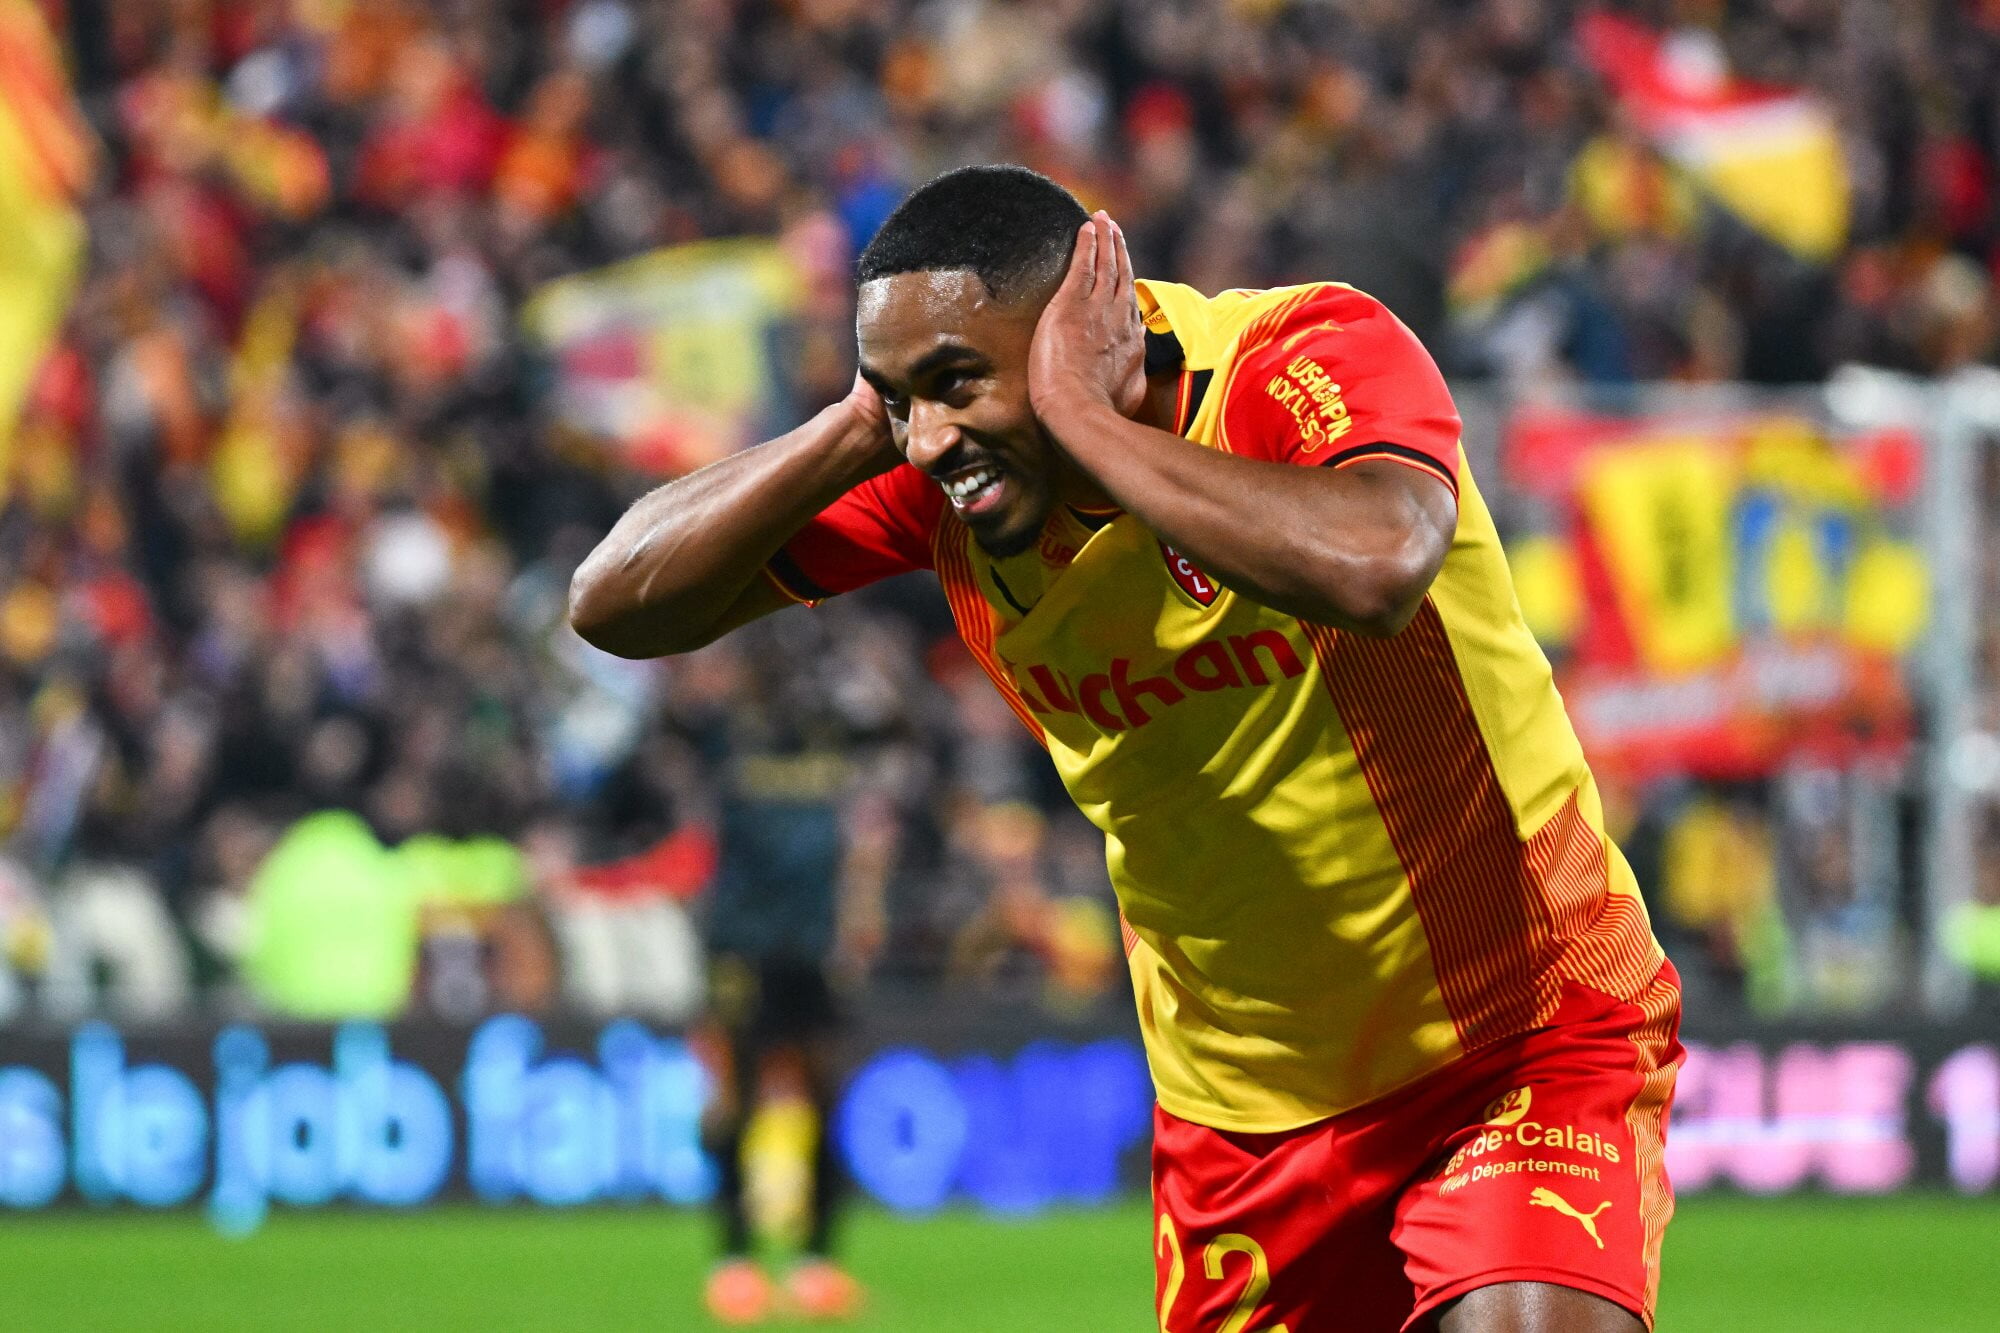 RC Lens win at home, jump to fifth